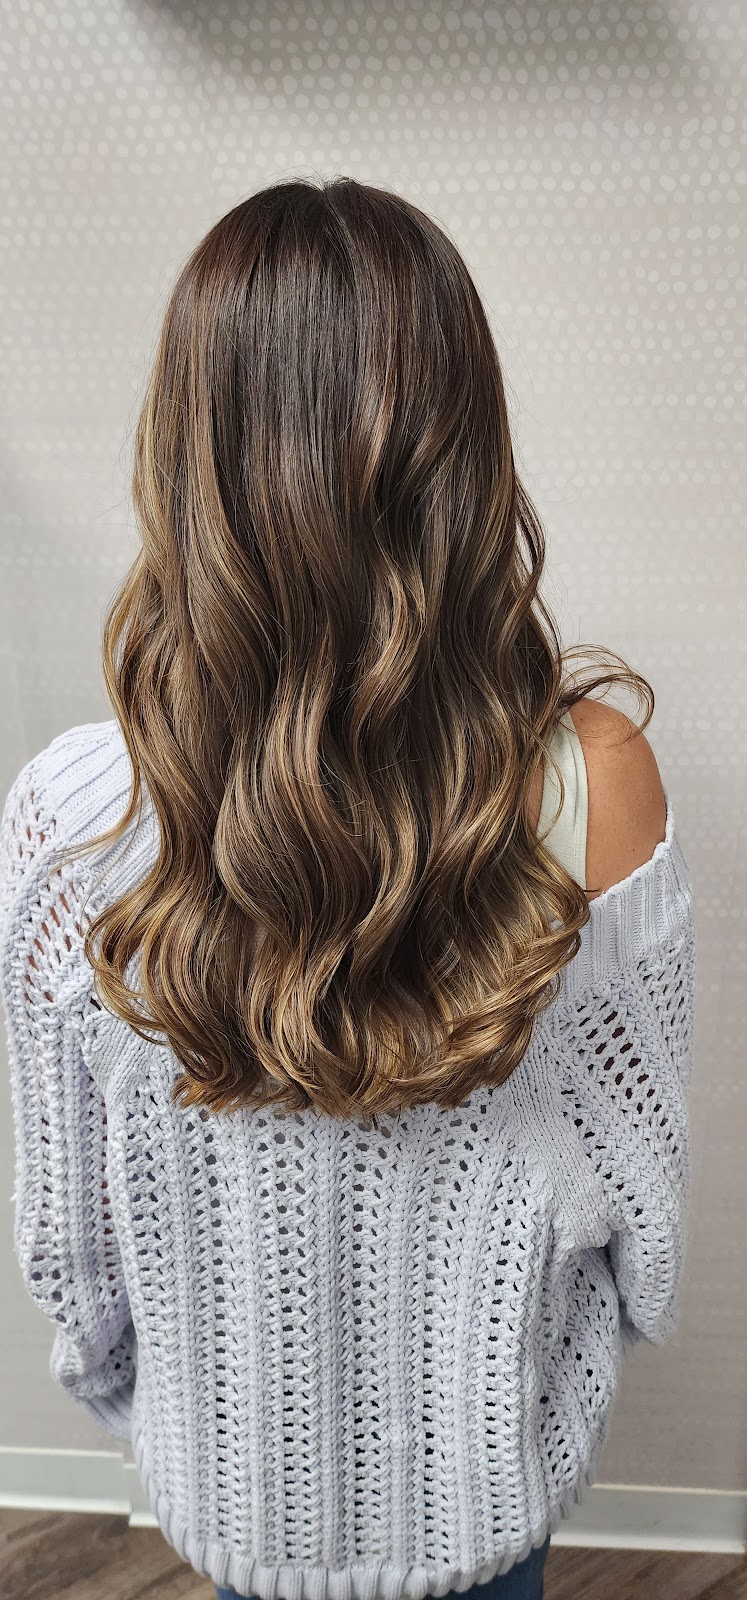 Hair By Natalie | 520 South Blvd Suite 11, Baraboo, WI 53913, USA | Phone: (608) 448-6885